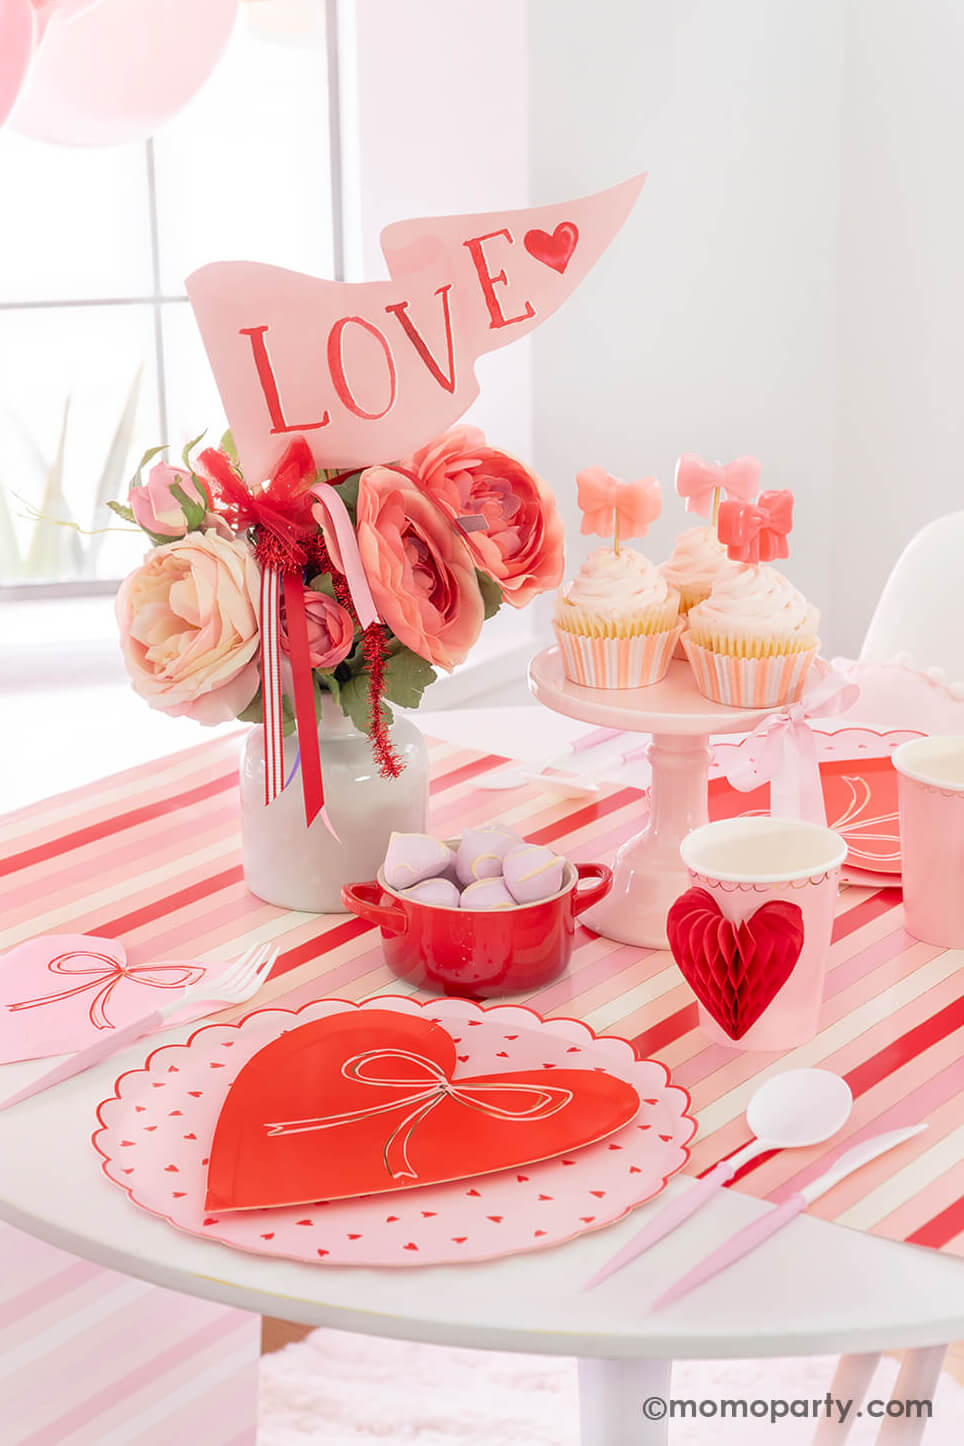 Momo Party presents A Bow-Themed Valentine's Day Party Set up. This Bow-tastic Table Setting is filled with heartwarming details, featuring Meri Meri Heart Pattern Dinner Plates layered with Bow Plates and matching napkins, Honeycomb Heart Cups, Pink Bow Candles atop cupcakes, and a Love Party Pennant adorning the flower vase, all elegantly arranged on the red-striped paper runner. It's a modern and cute idea to elevate your Valentine's celebration or Galentine's Day with your besties.